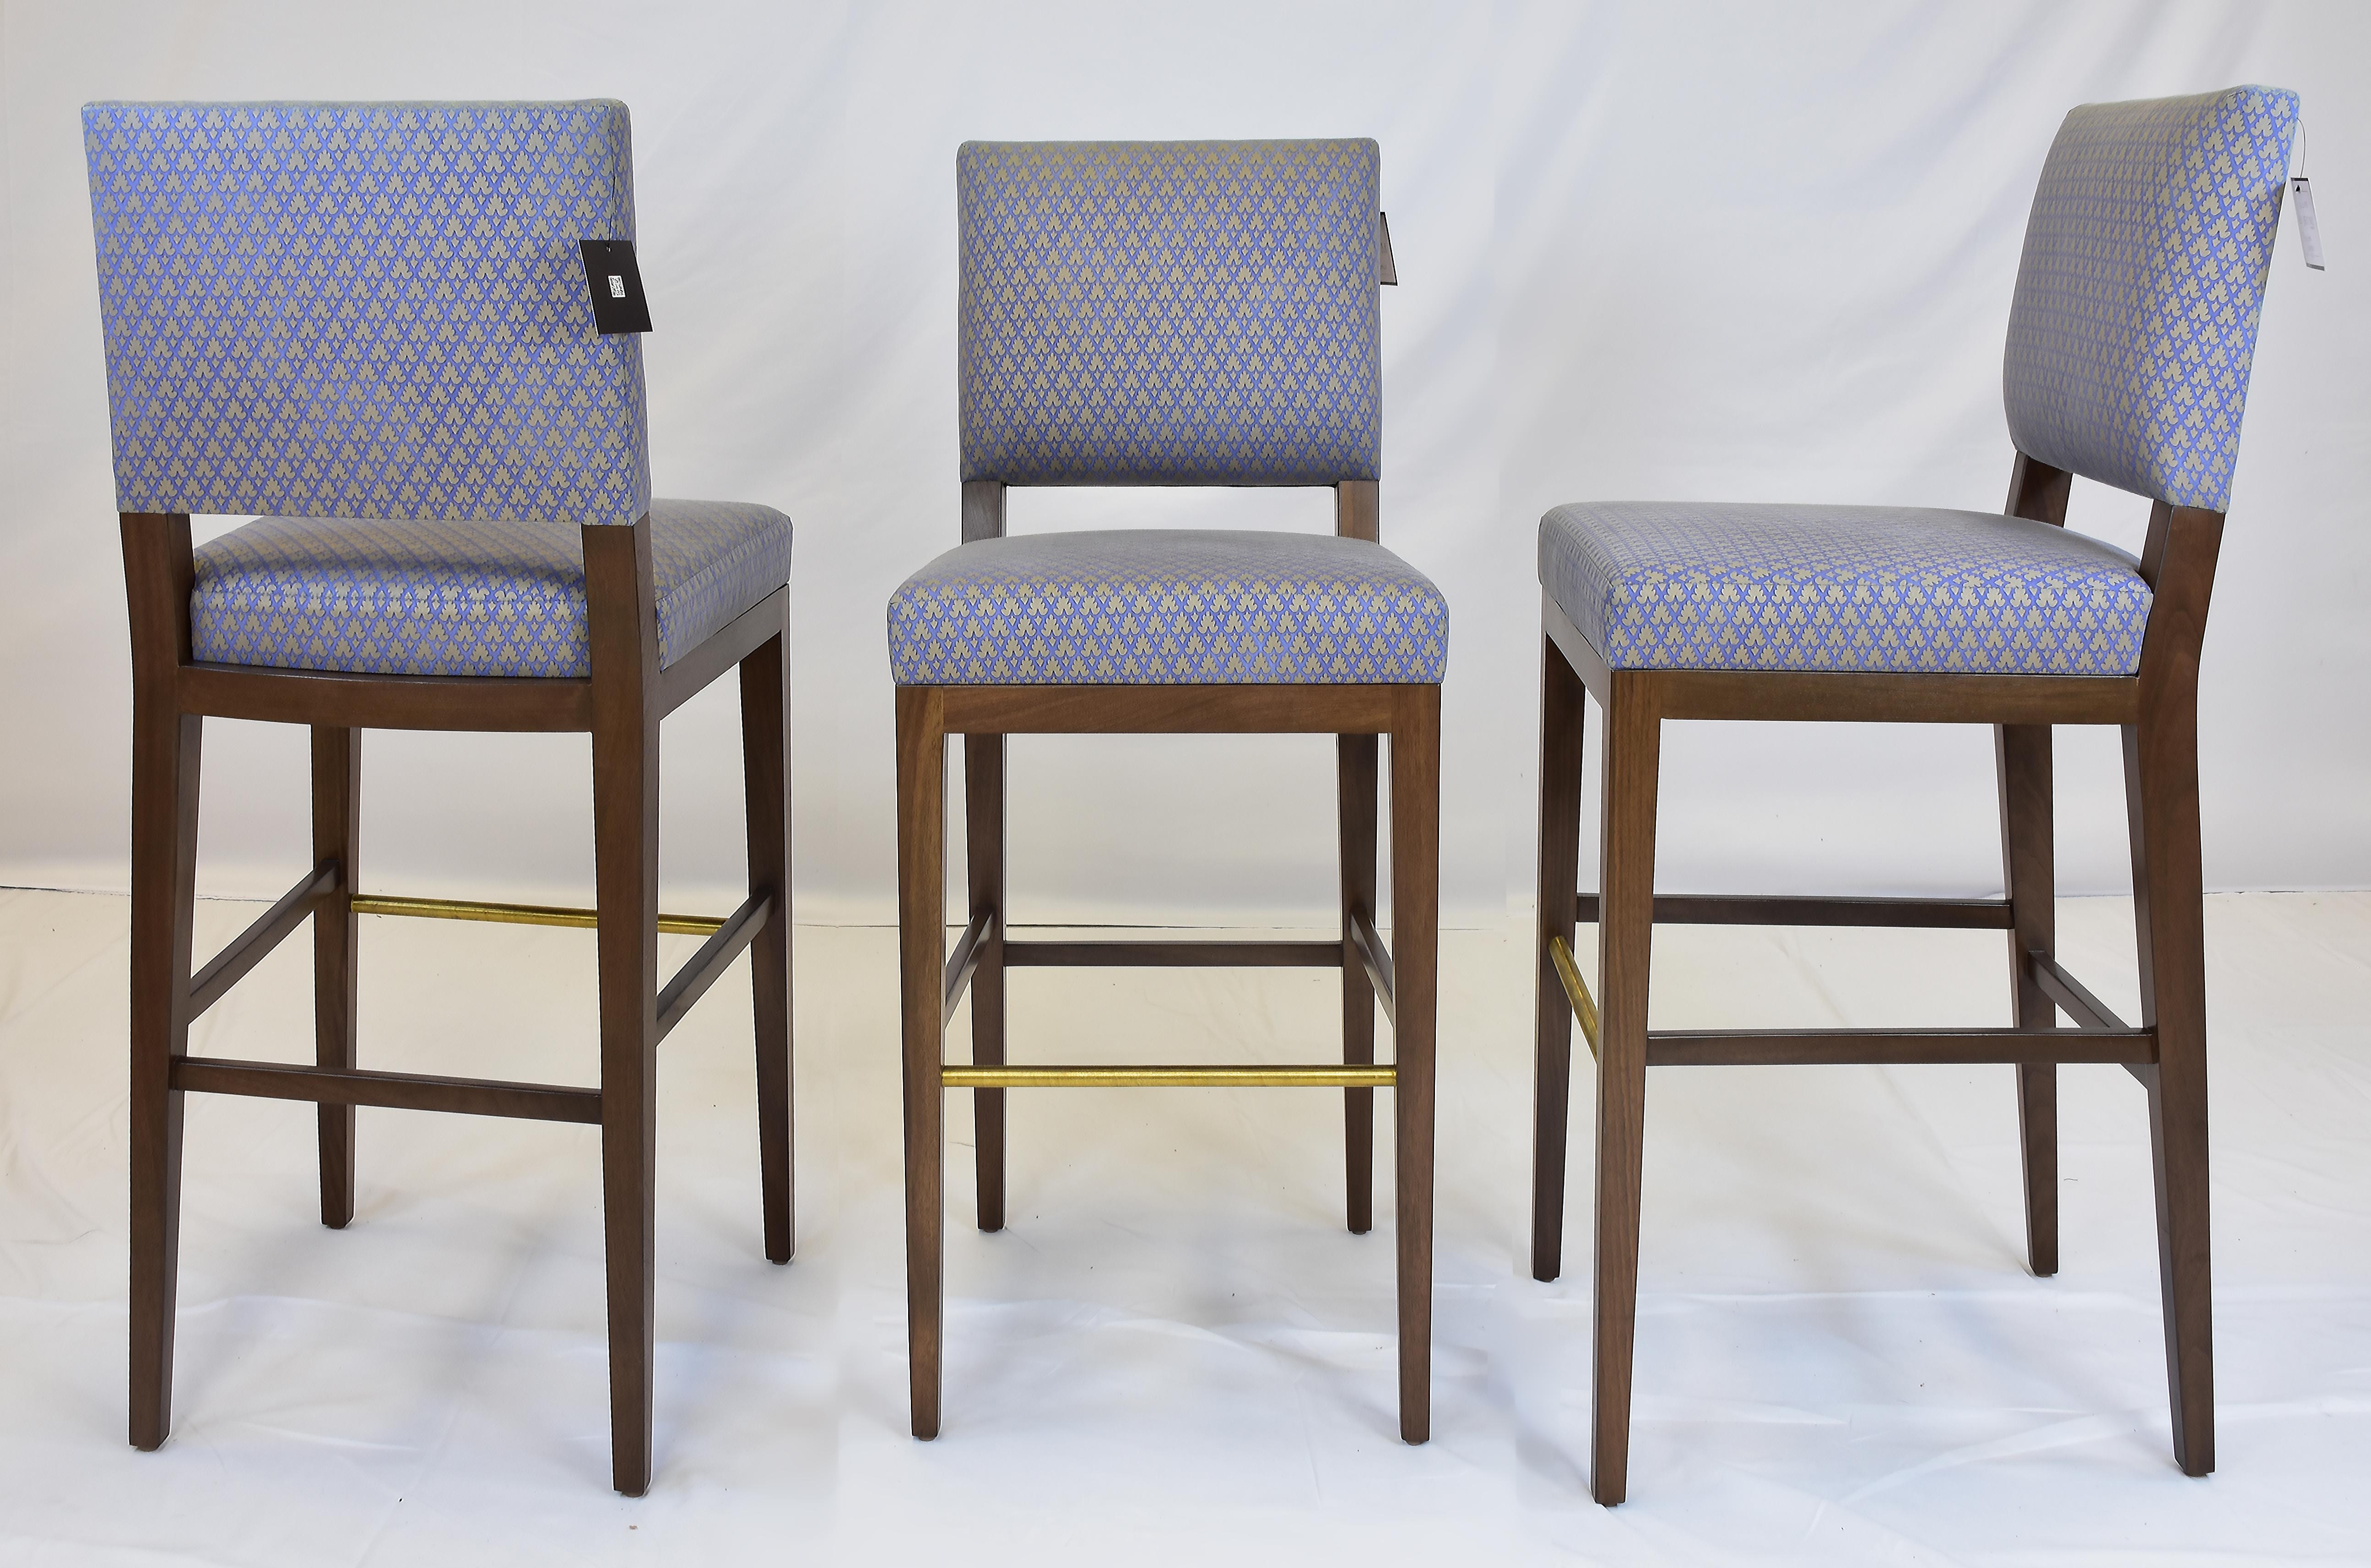 Le Jeune Upholstery Barista Barstool with Brass, Showroom Models, Per Item

Offered for sale individually are BARISTA Barstool showroom models with Brass footrests. The Barista barstools have	tight seats and backs with exposed walnut wood legs and a